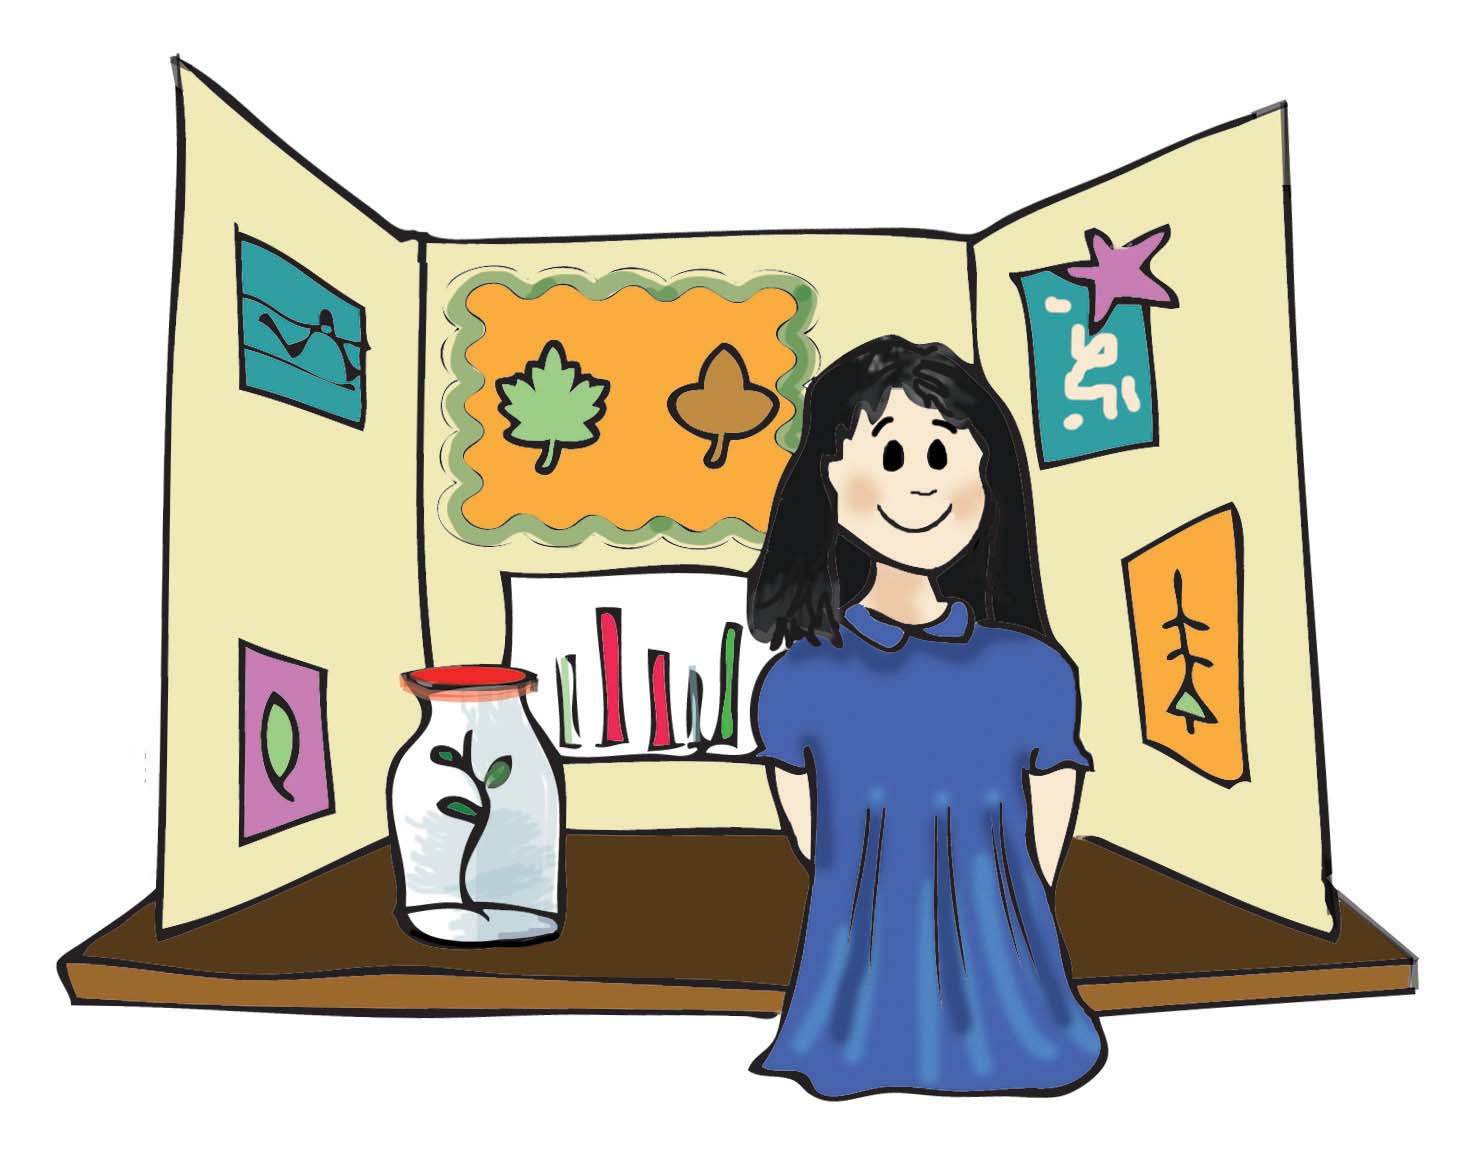 Science Fair Projects - Free Clipart Images